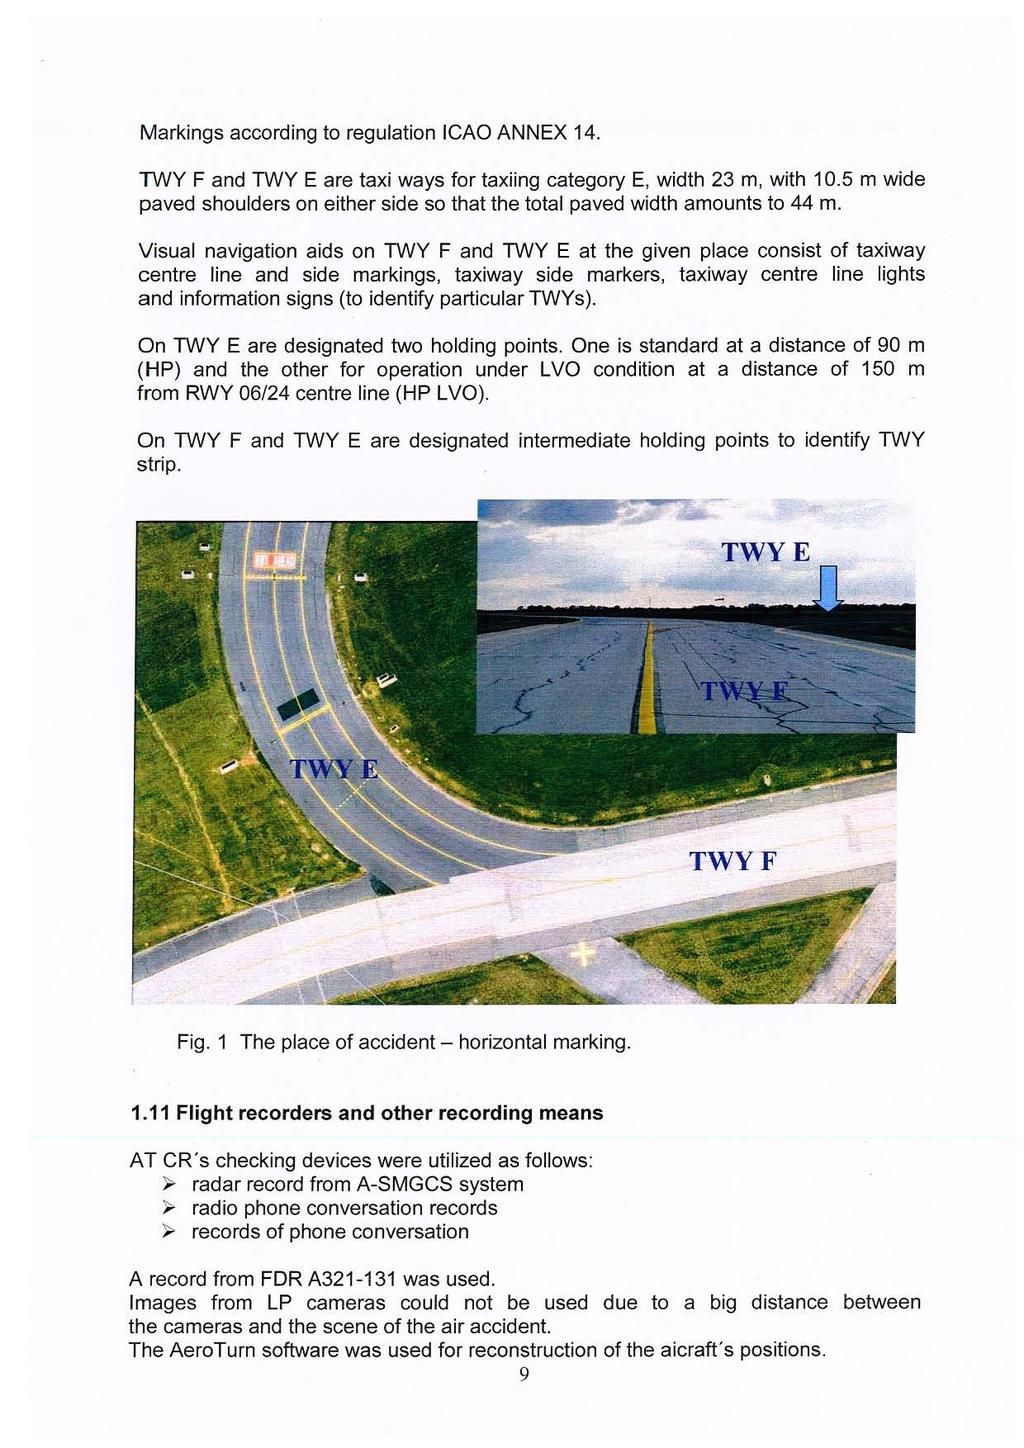 Markings according to regulation ICAO ANNEX 14. TWY F and TWY E are taxi ways for taxiing category E, width 23 m, with 10.